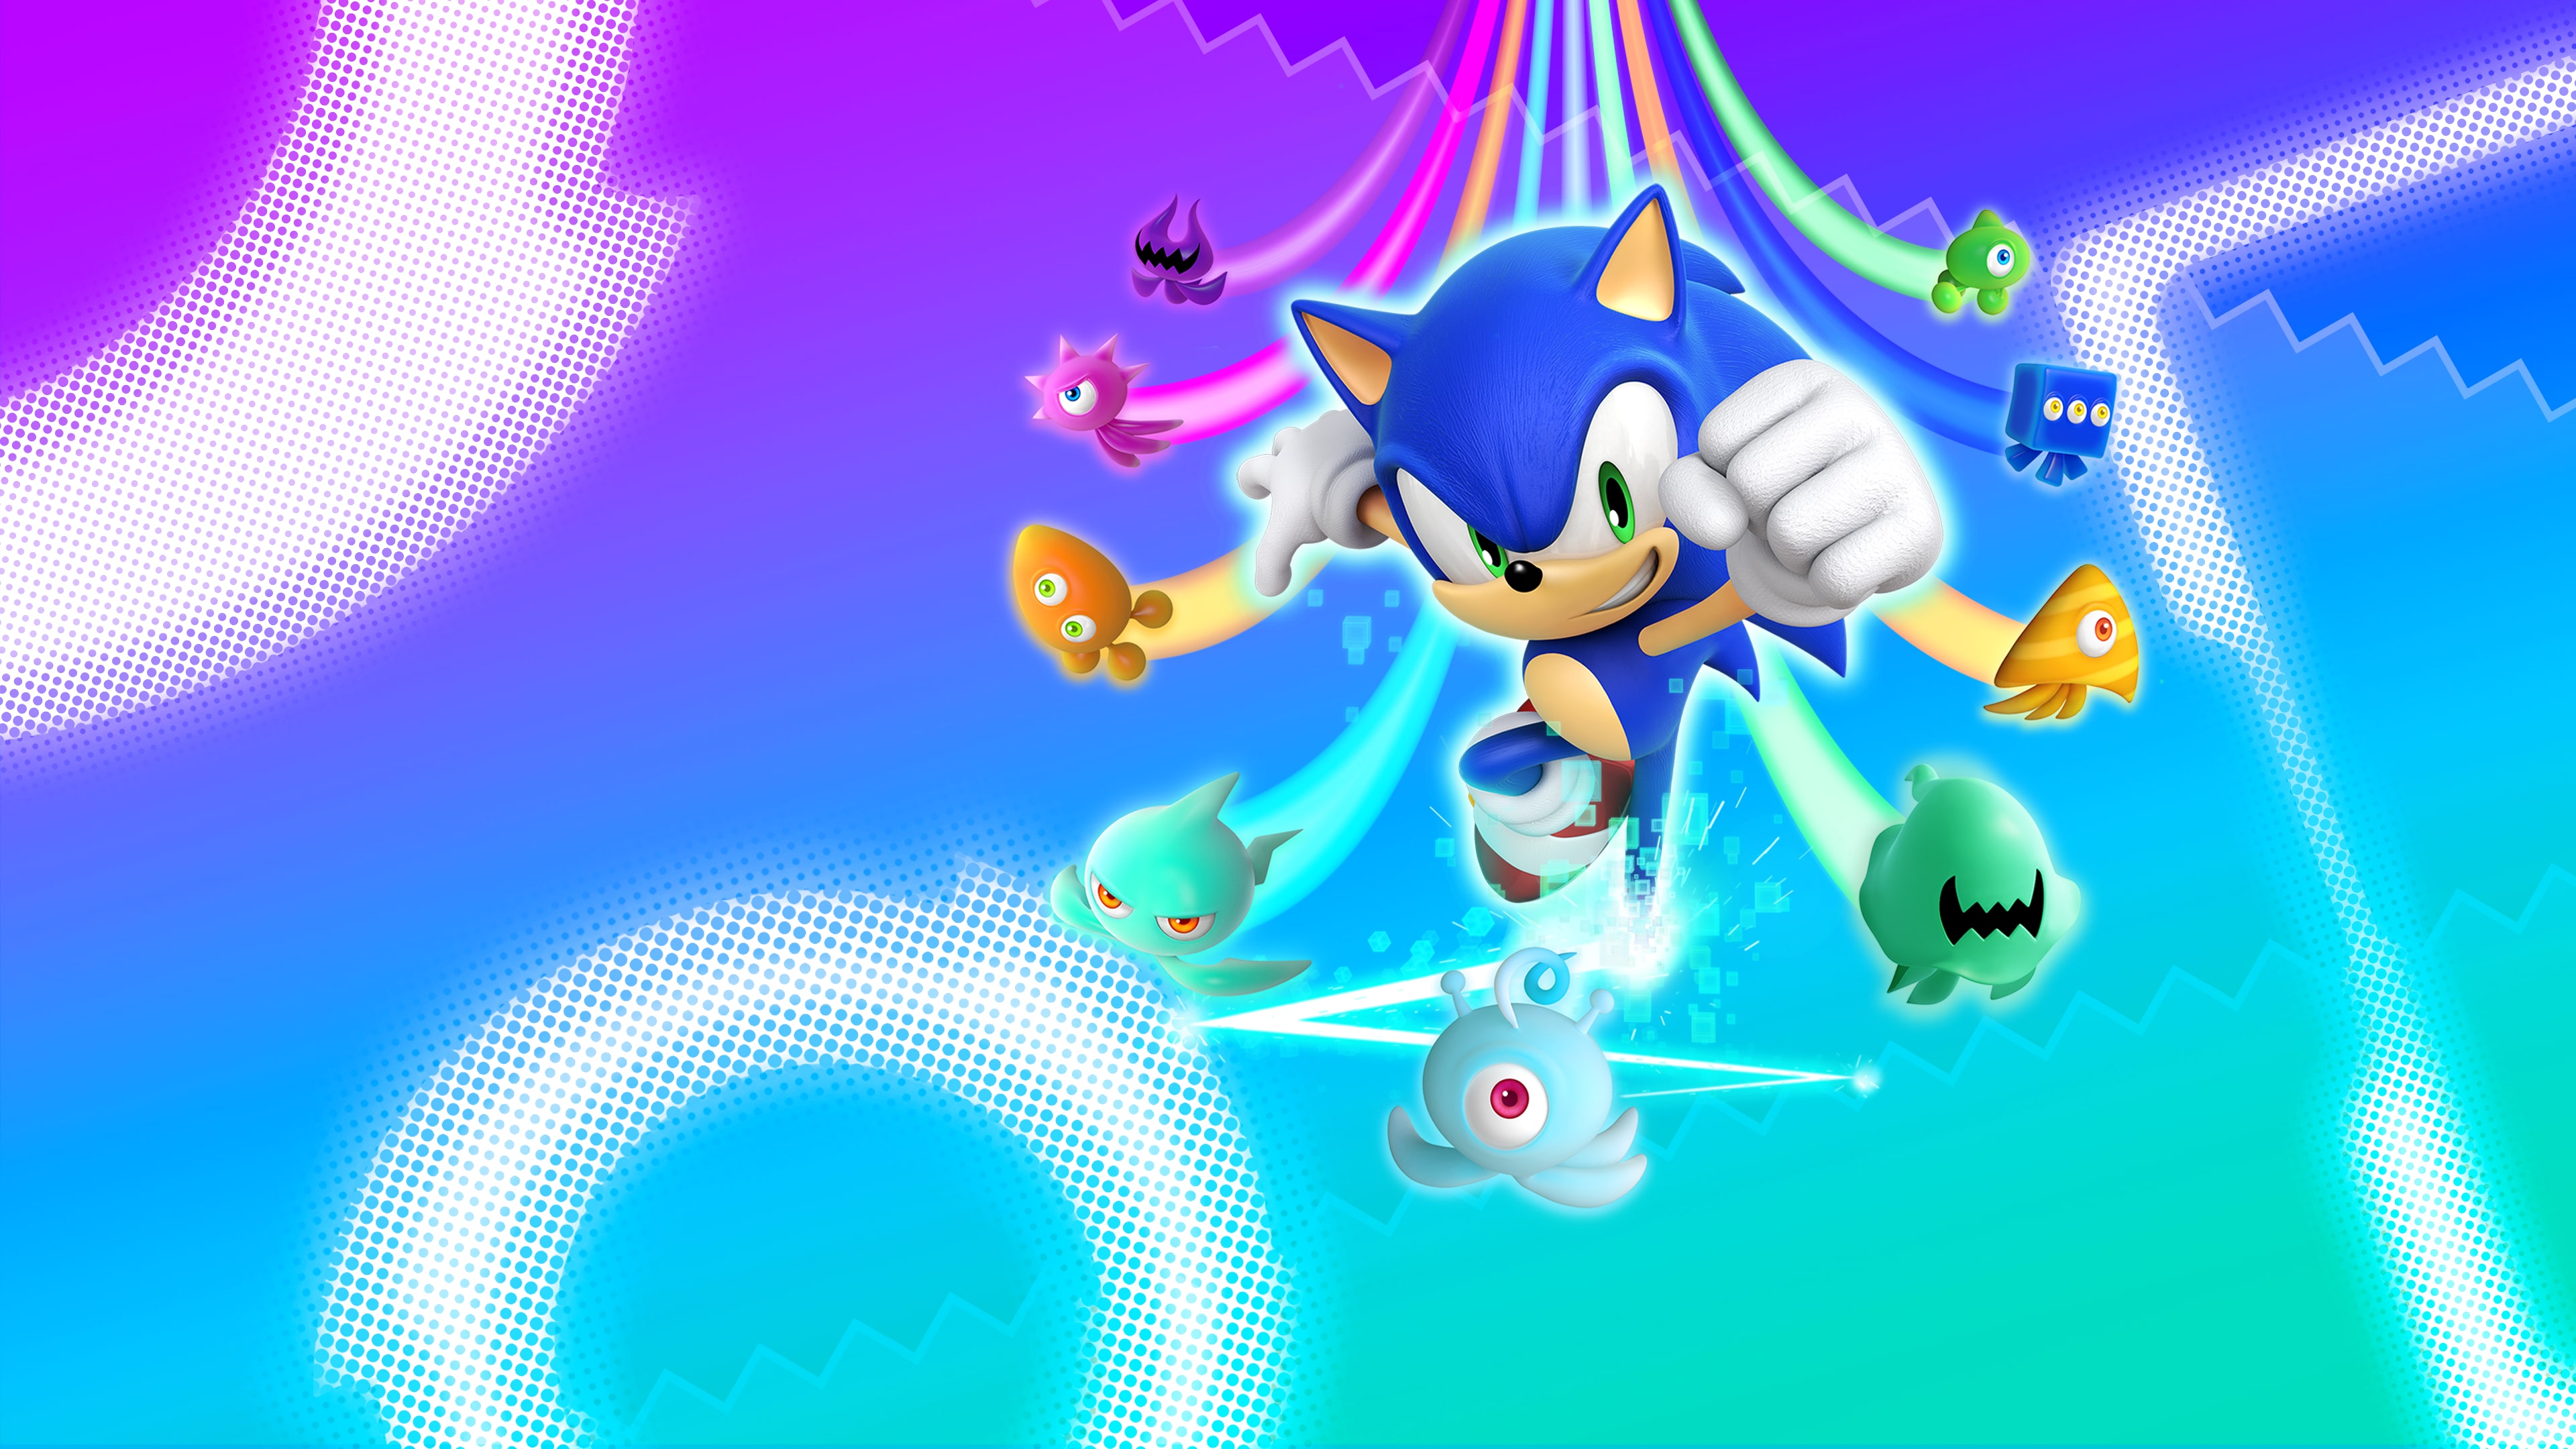 Sonic Colors: Ultimate™